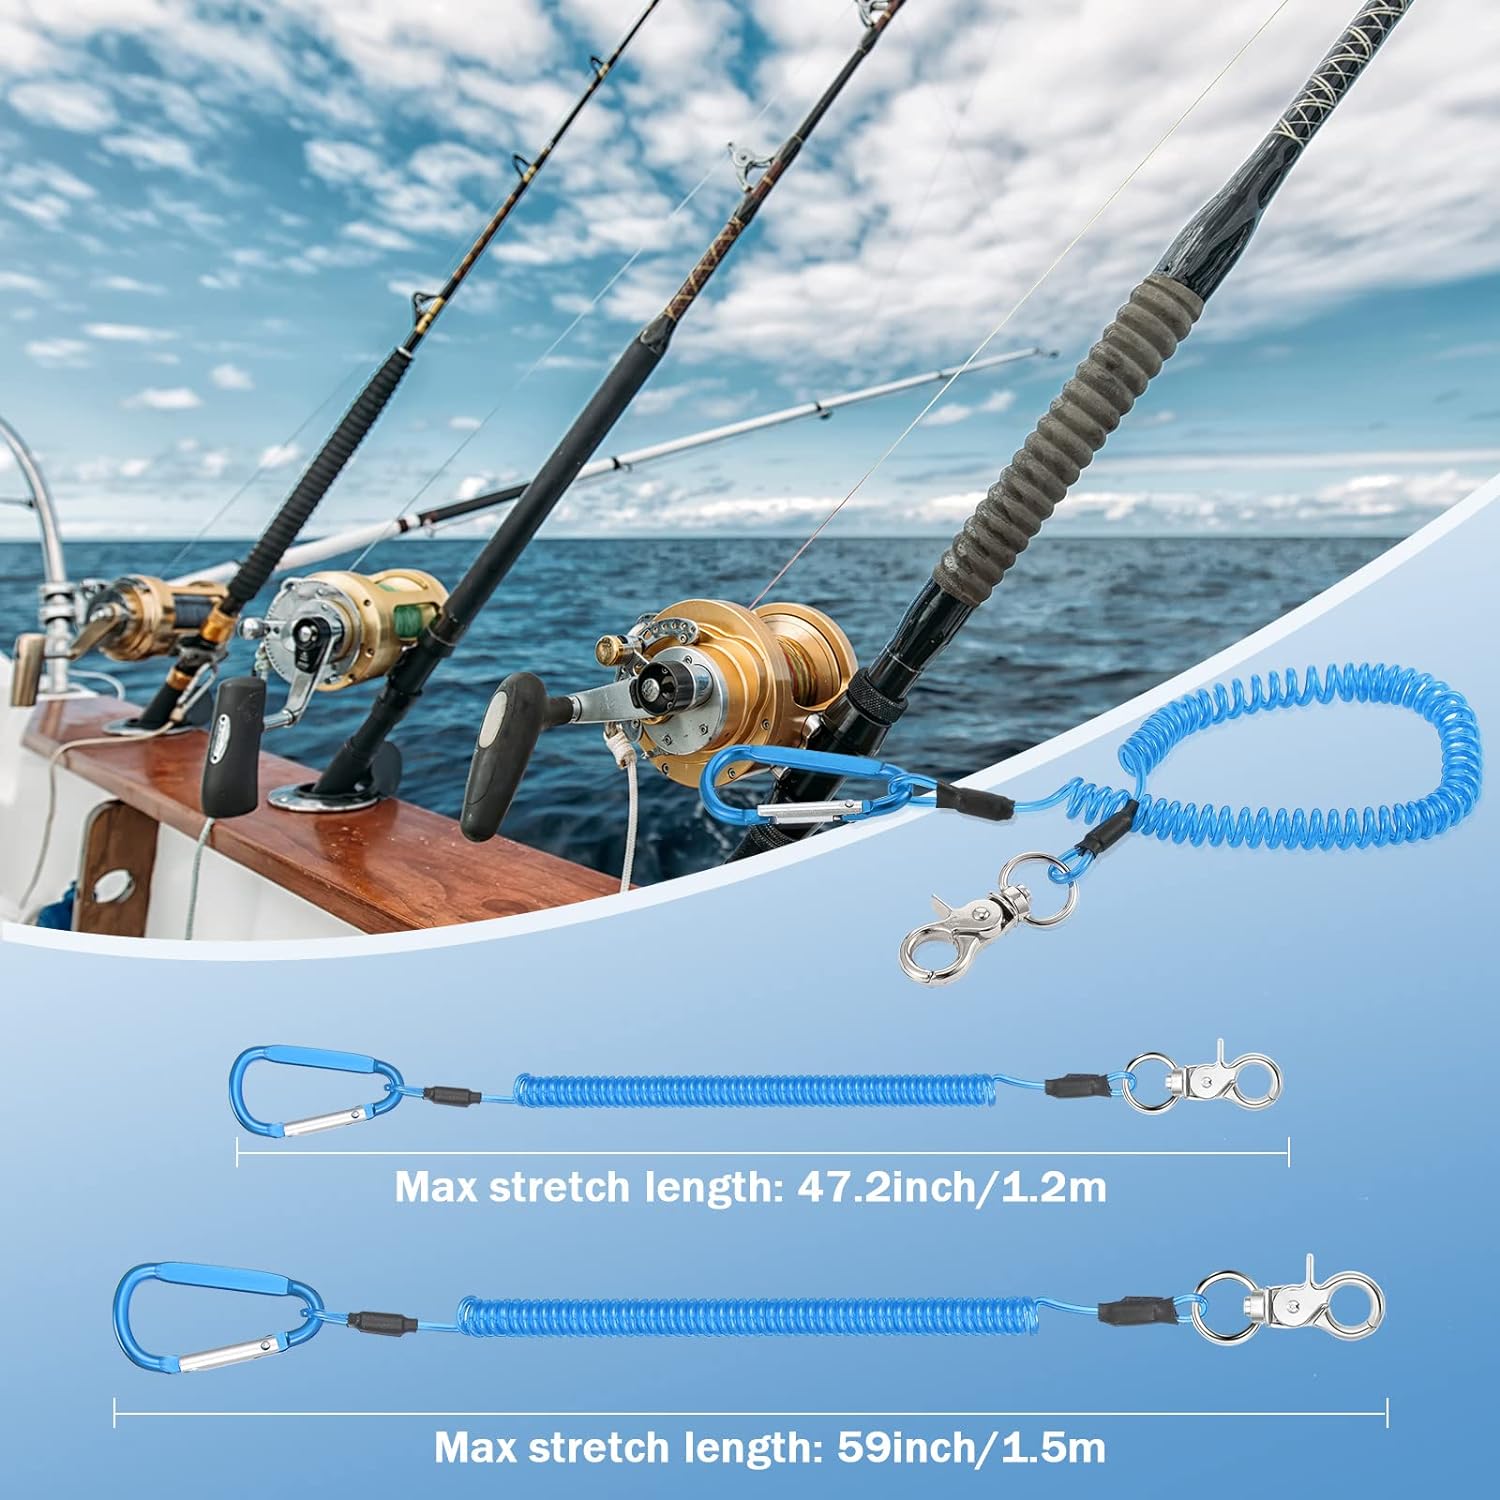 6 Pack Heavy Duty Fishing Lanyard Steel Wire Coiled Lanyard Kayak Retractable Tool Leash Fishing Rod Safety Lanyard Fishing Gear Lanyard Tether Accessories with Alloy Clips for Pliers Boating